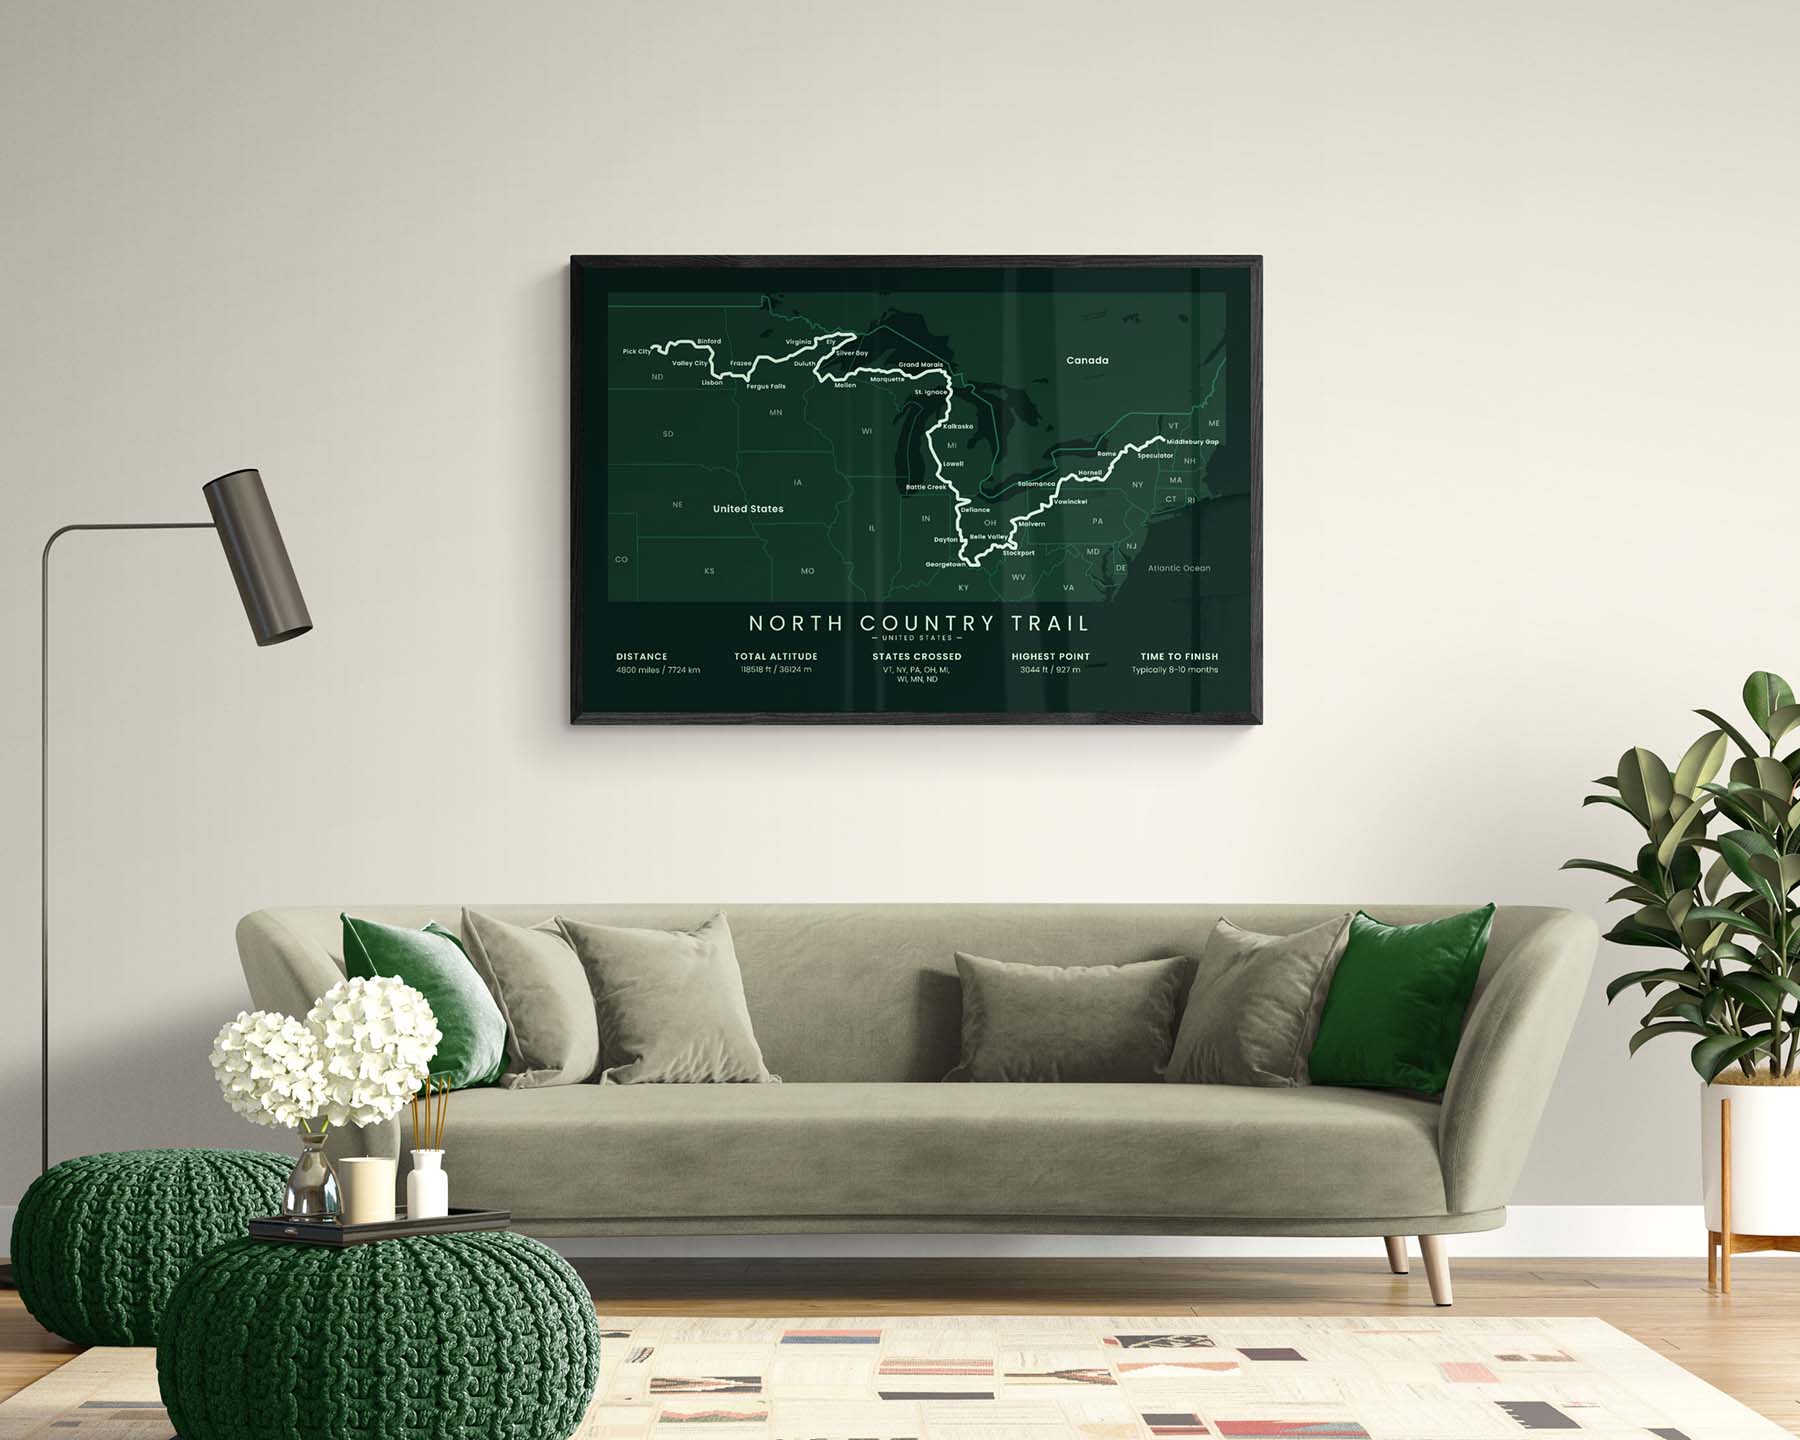 North Country Trail (United States) Path Print in Minimal Room Decor